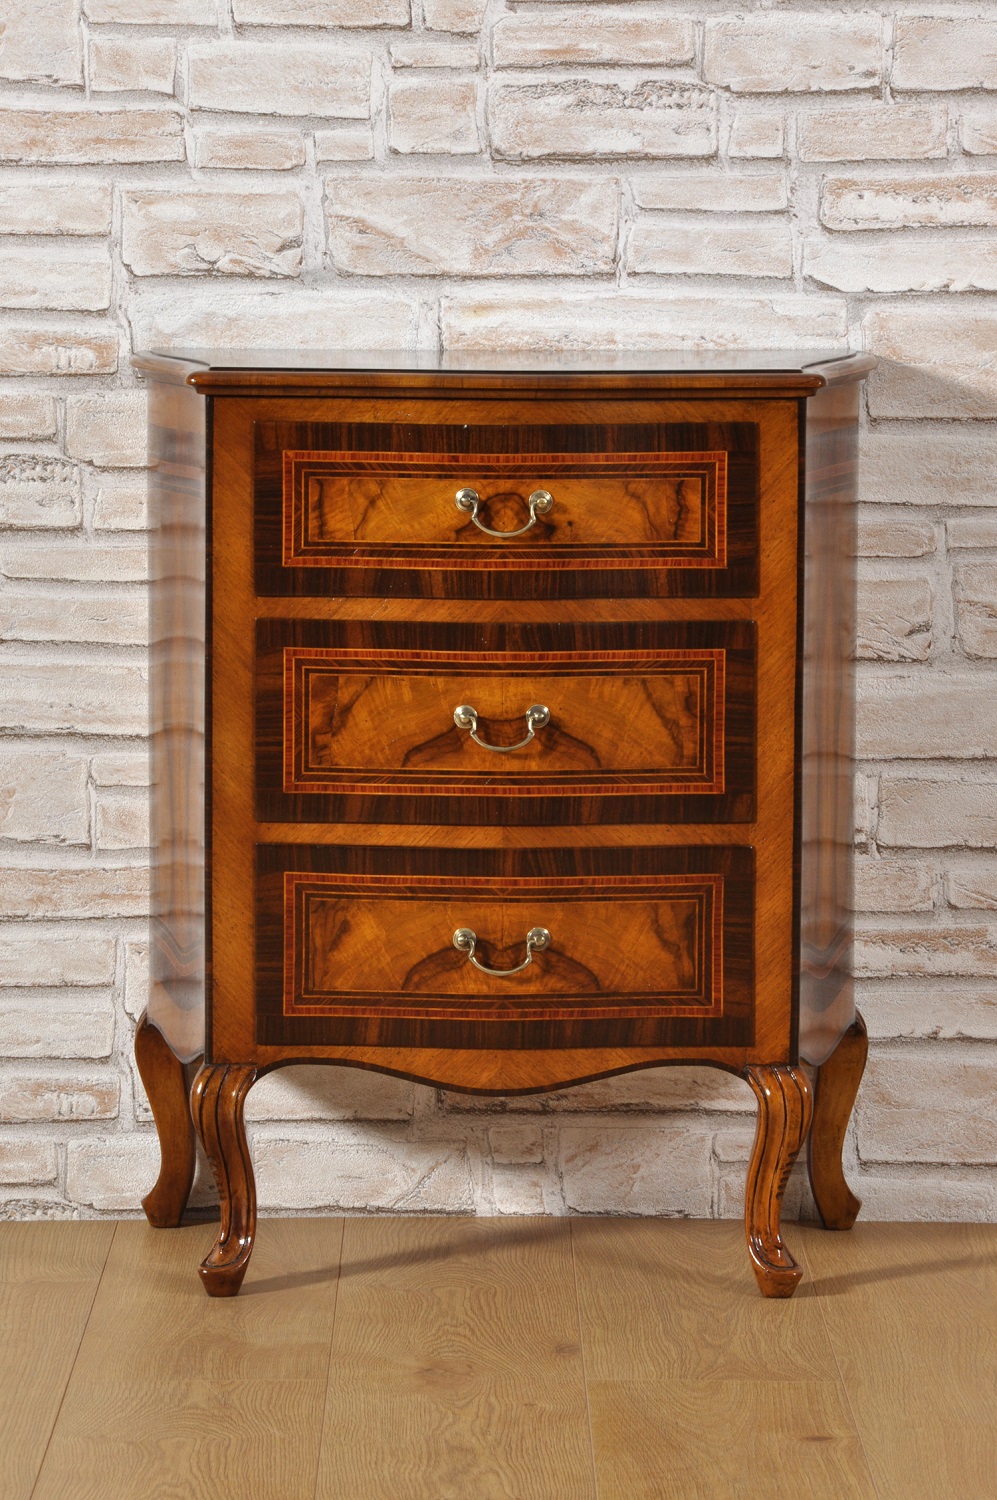 inlaid and shaped nightstand with carved legs in Lombard Venetian style, luxurious handmade custom made in Italy furniture, hand-polished with natural shellac and beeswax products